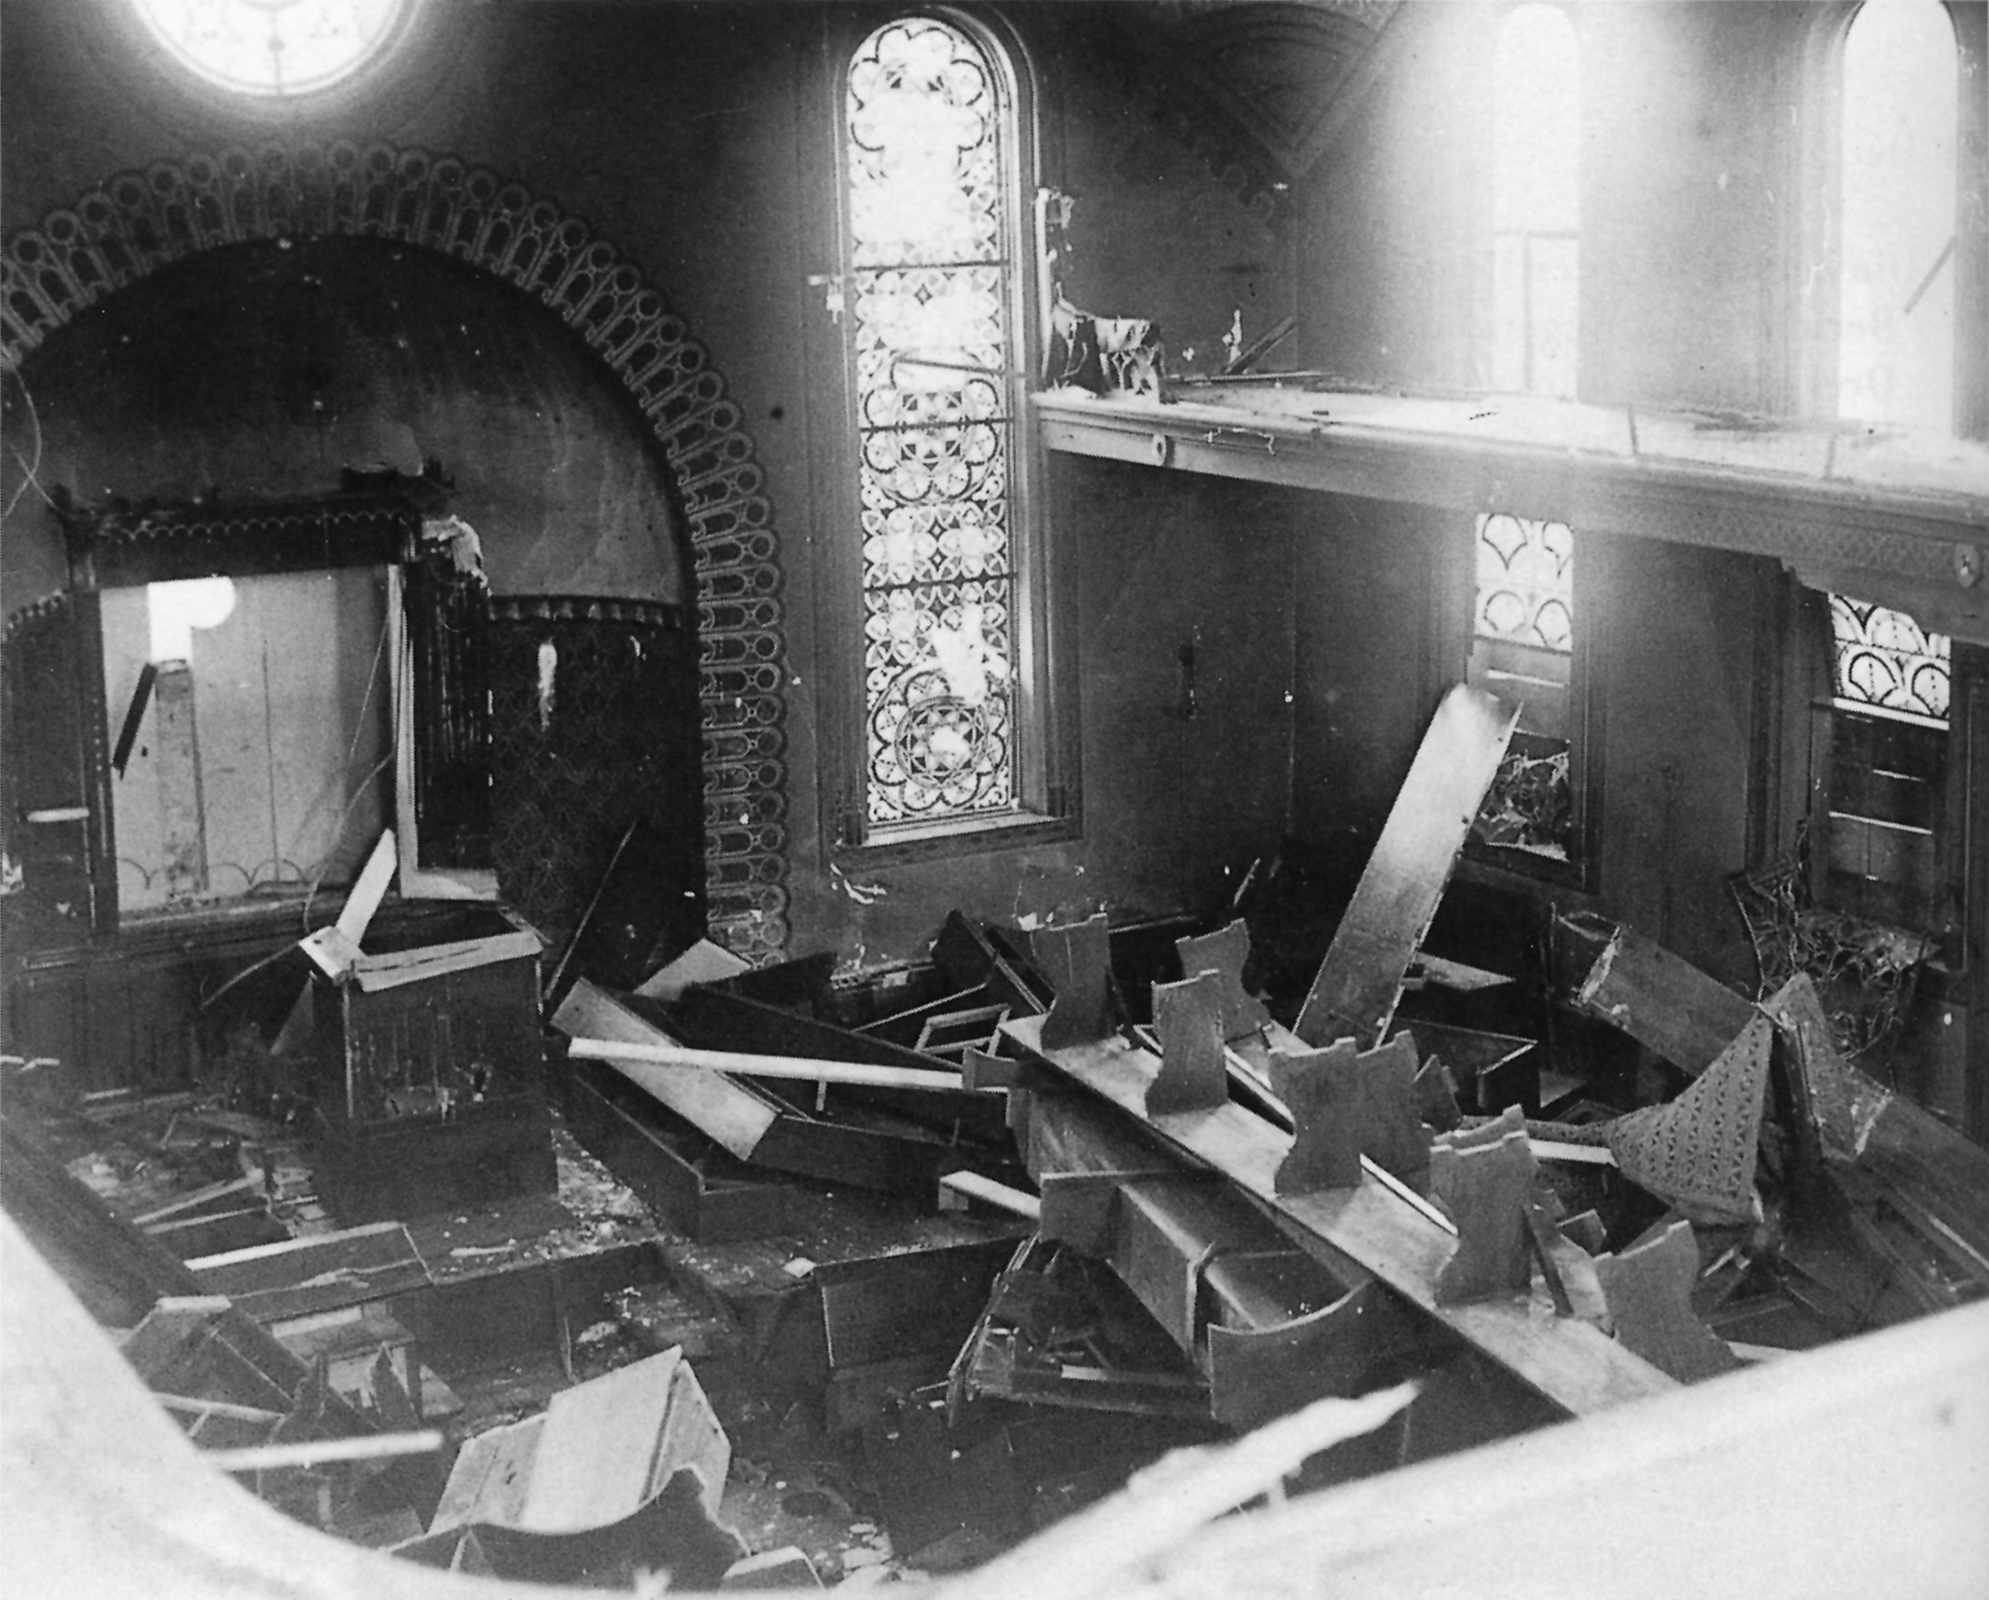 Destroyed synagogue in Hechingen